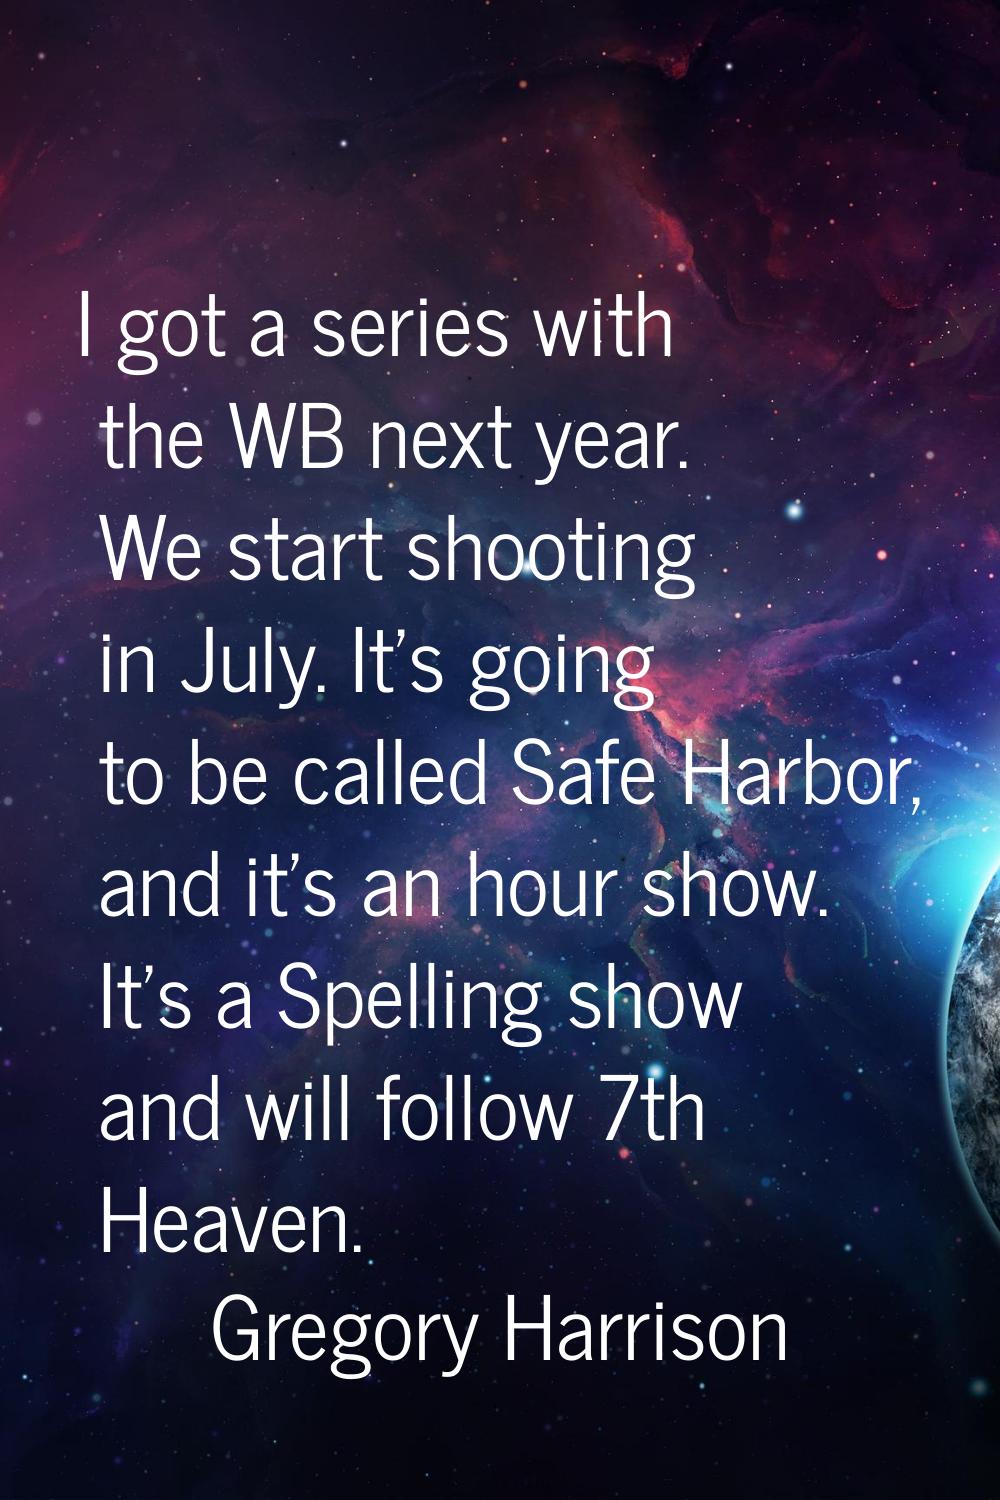 I got a series with the WB next year. We start shooting in July. It's going to be called Safe Harbo